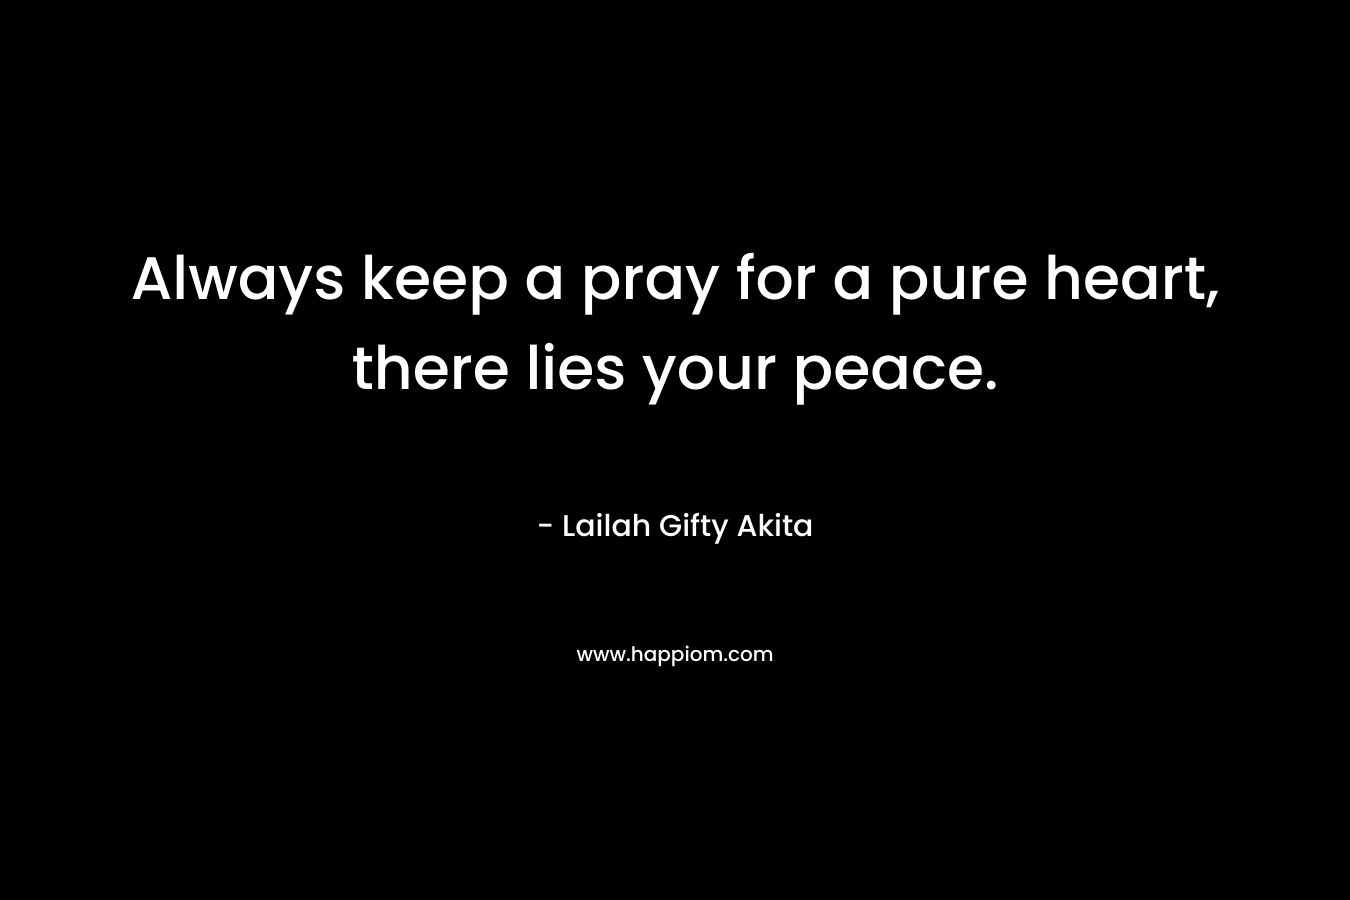 Always keep a pray for a pure heart, there lies your peace.